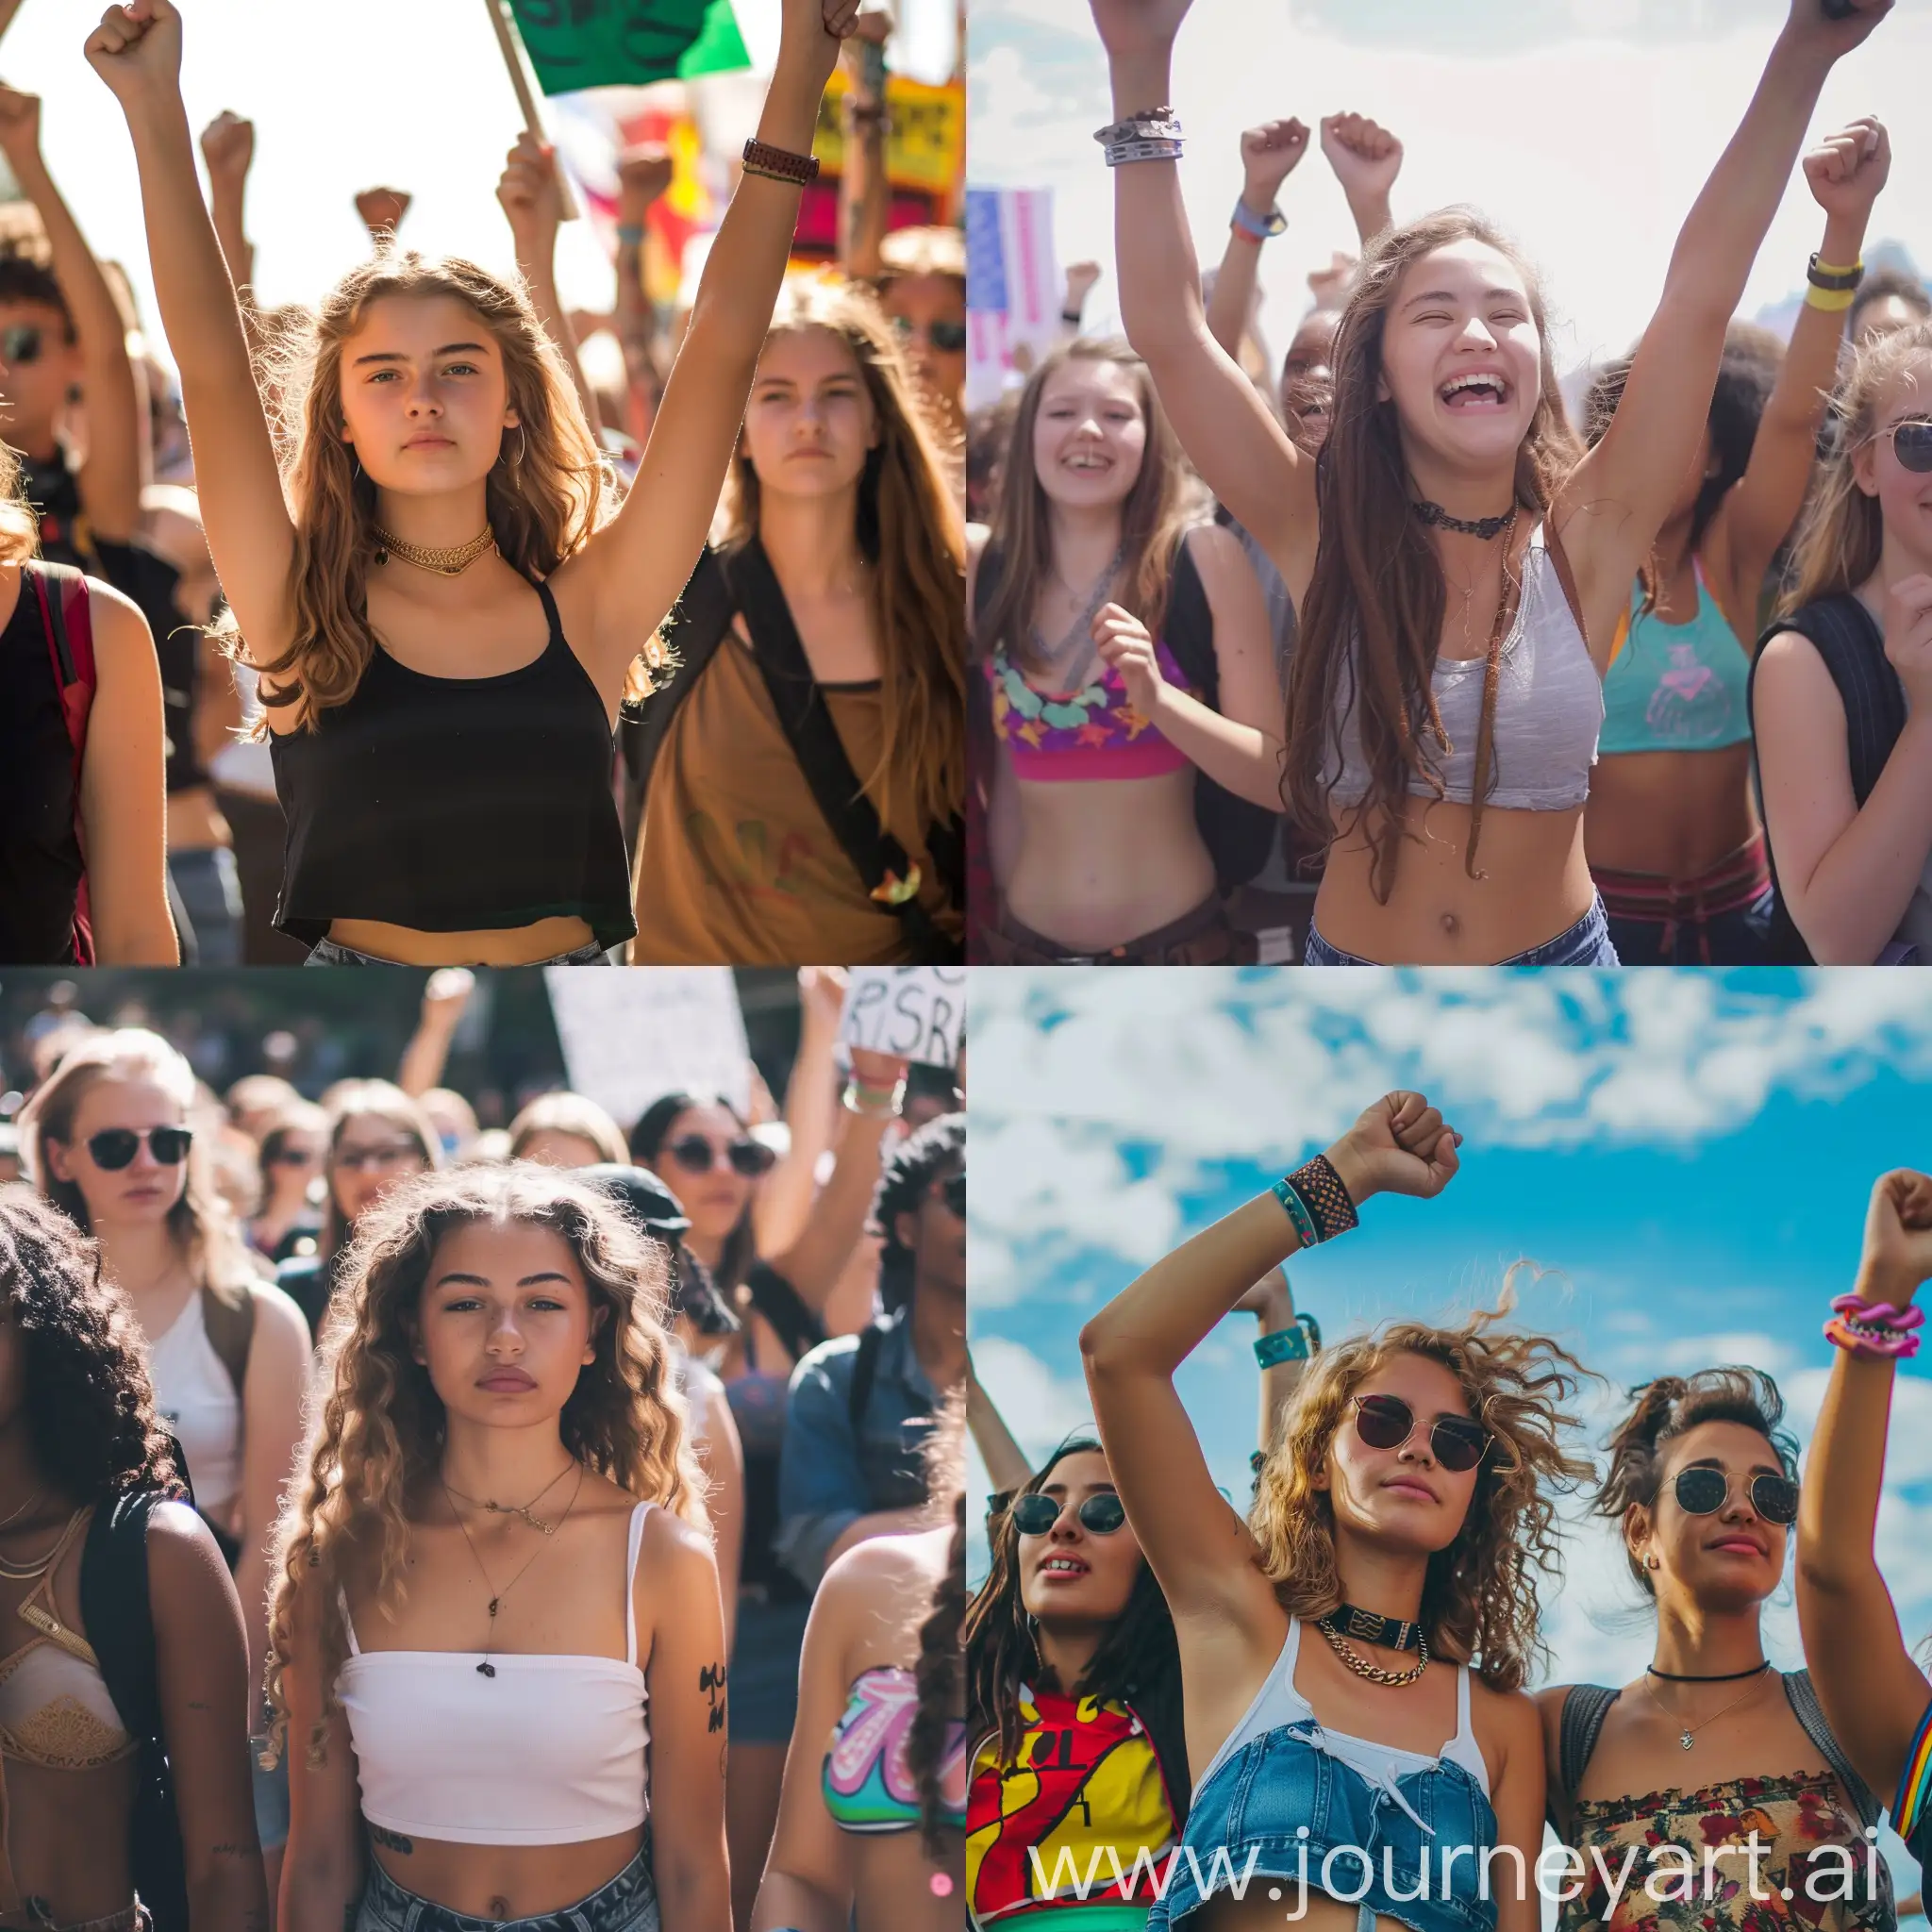 Empowered Girls in crop-tops Protesting for Freedom